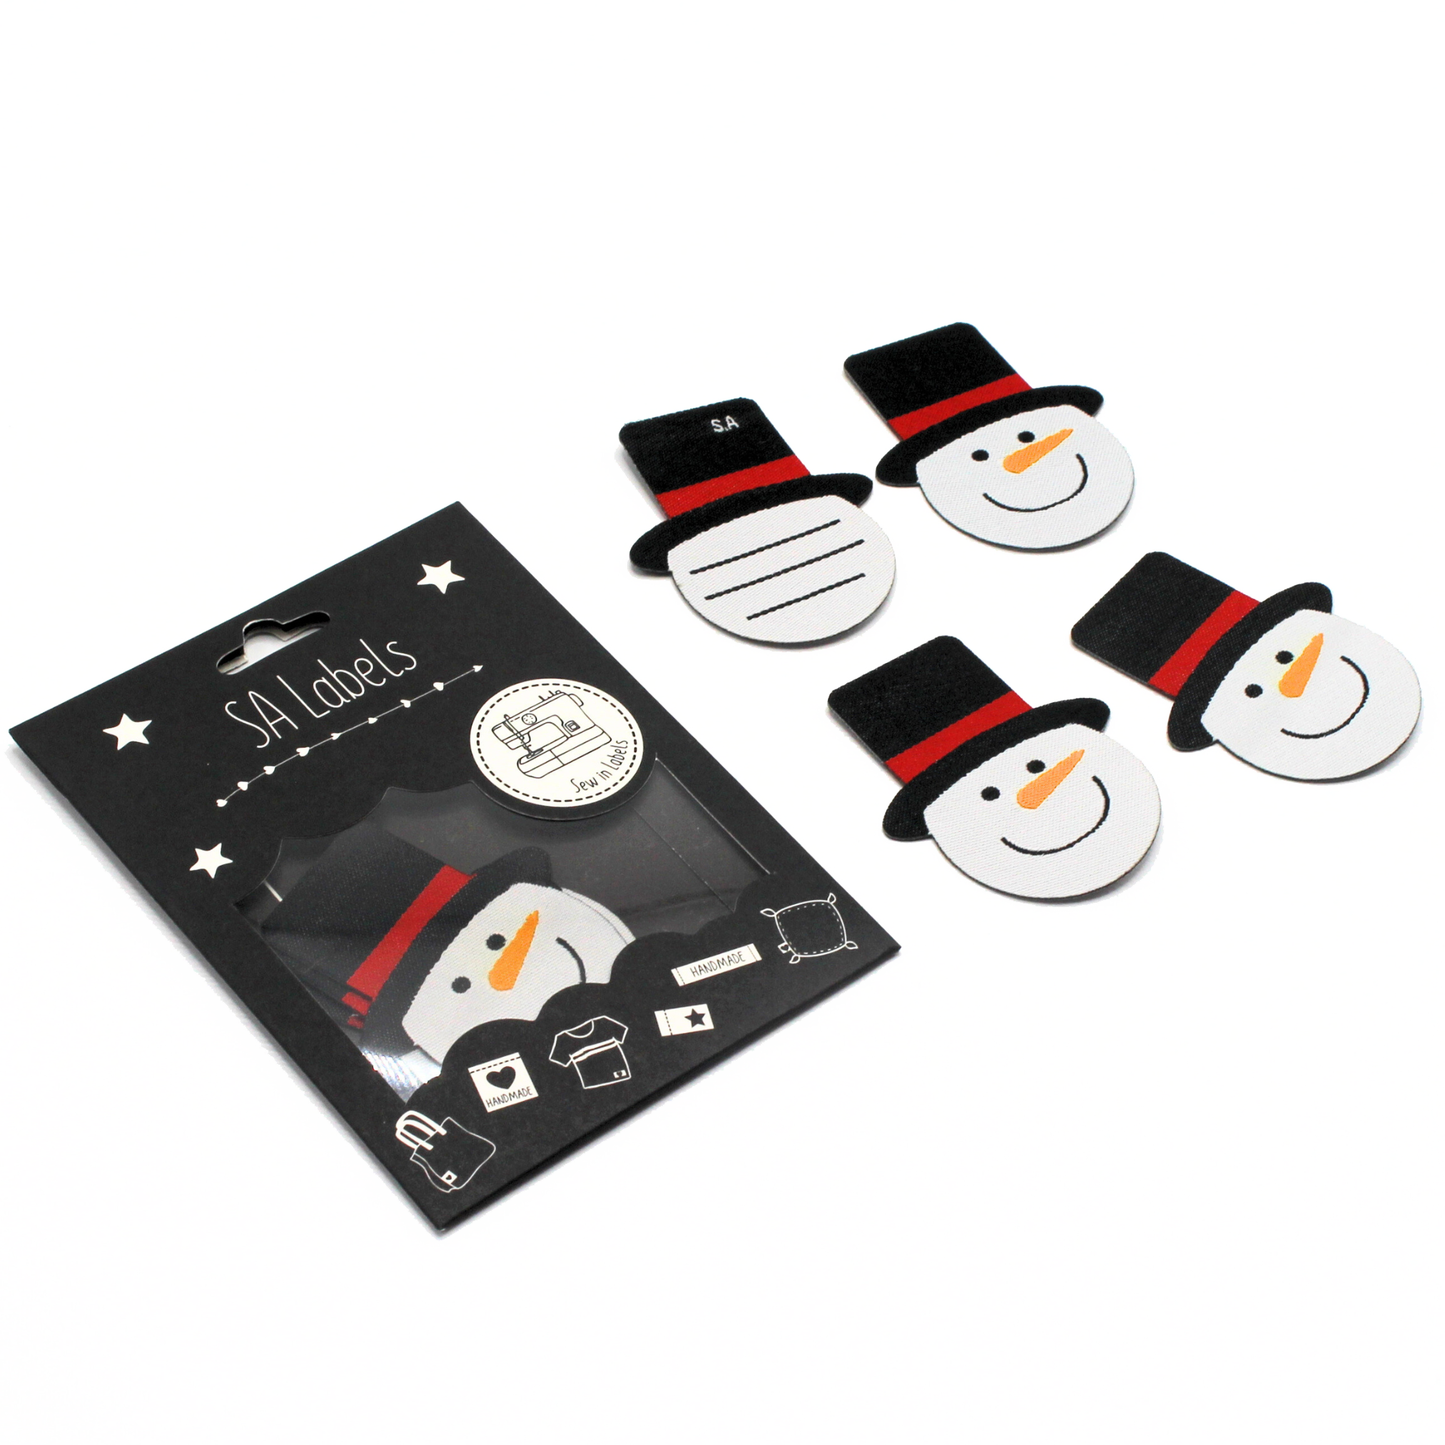 Snowman Tag | Silhouette Labels